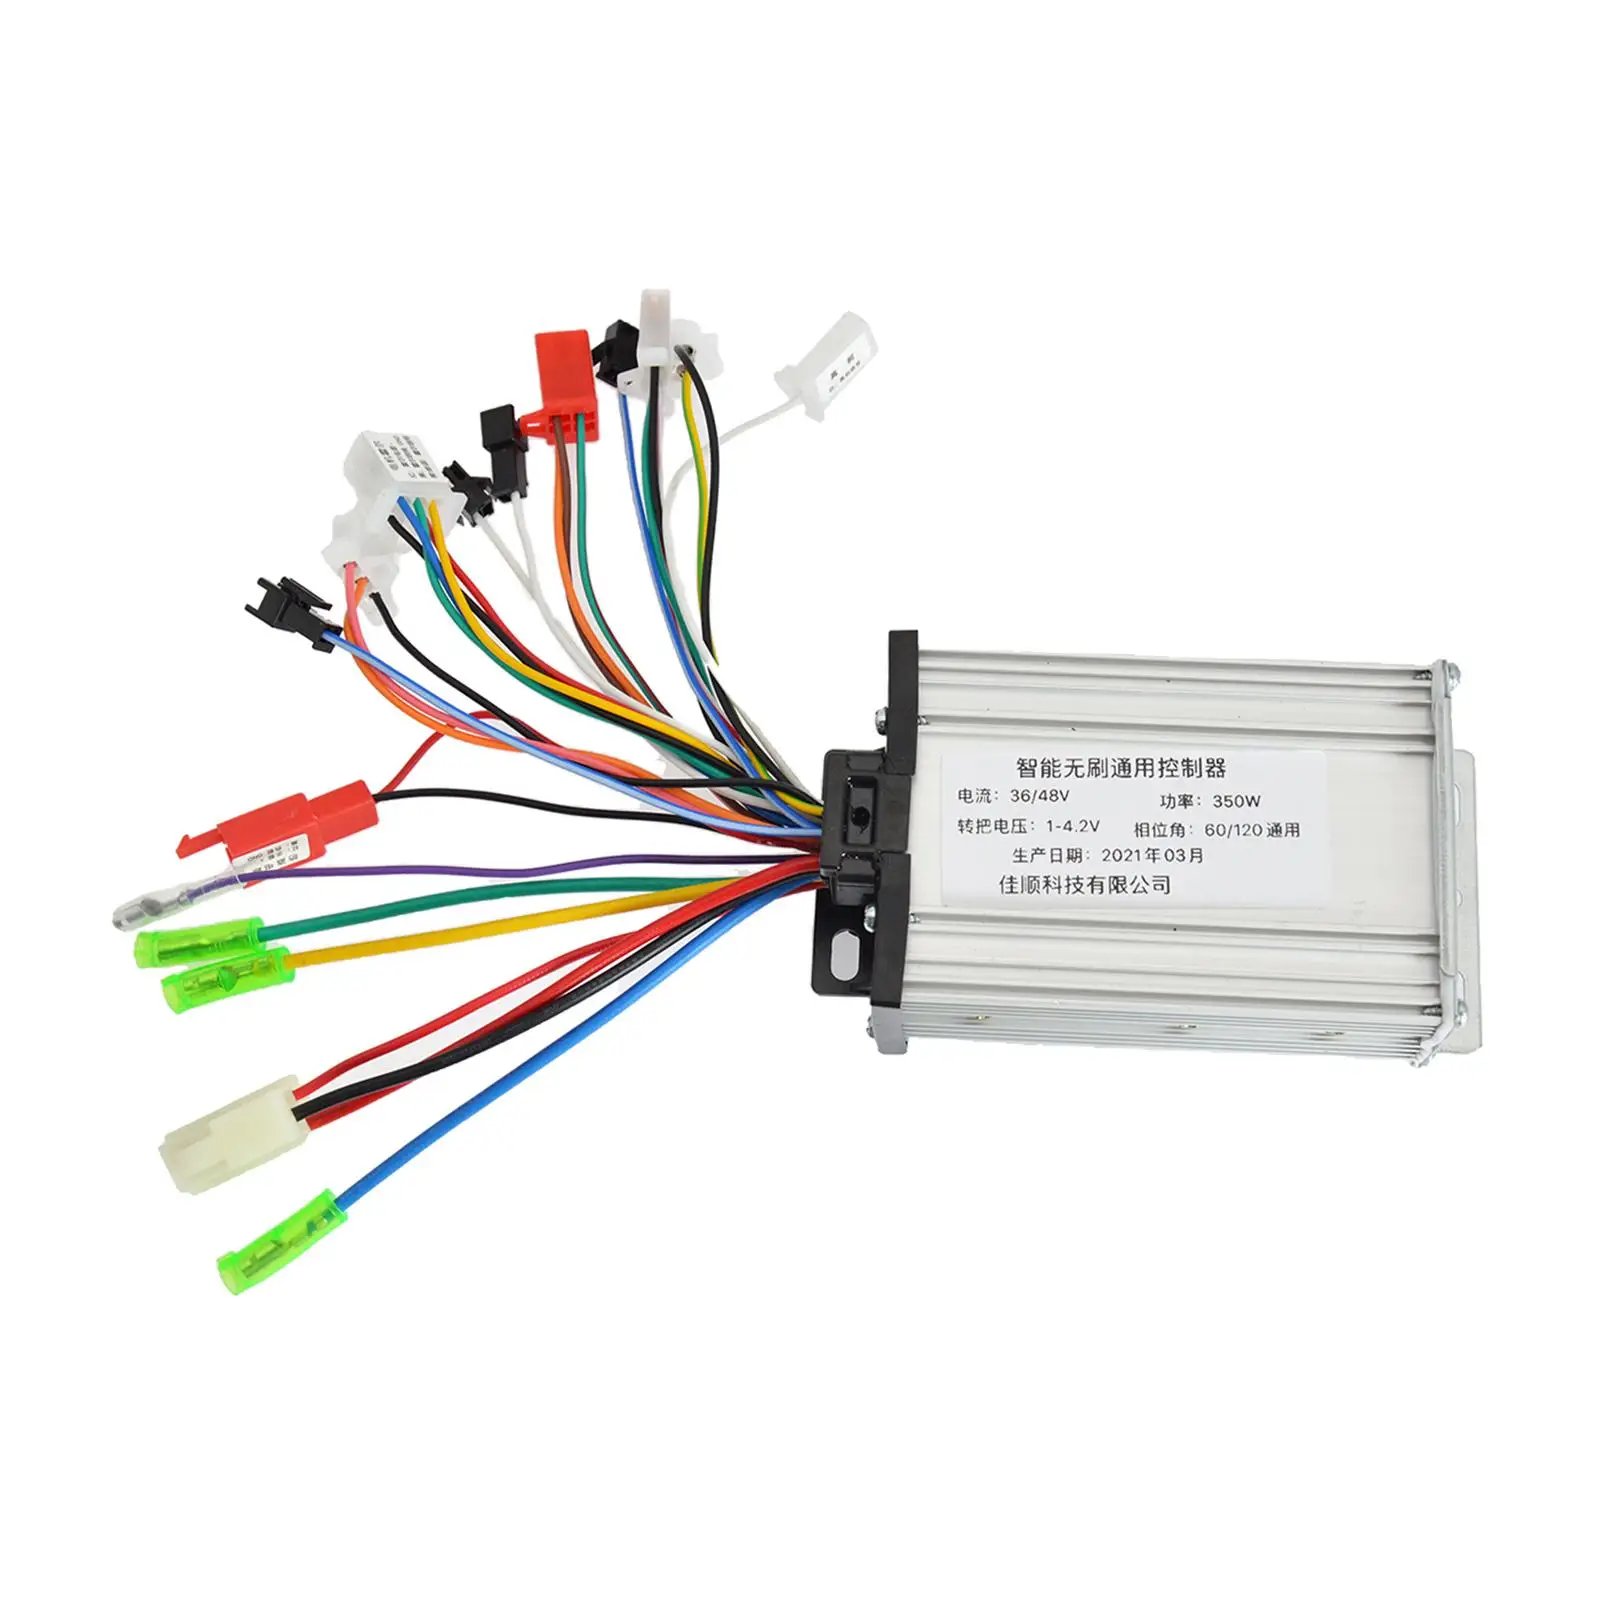 Deluxe Electric Bicycle Controller 350W Motor Control Box Conversion